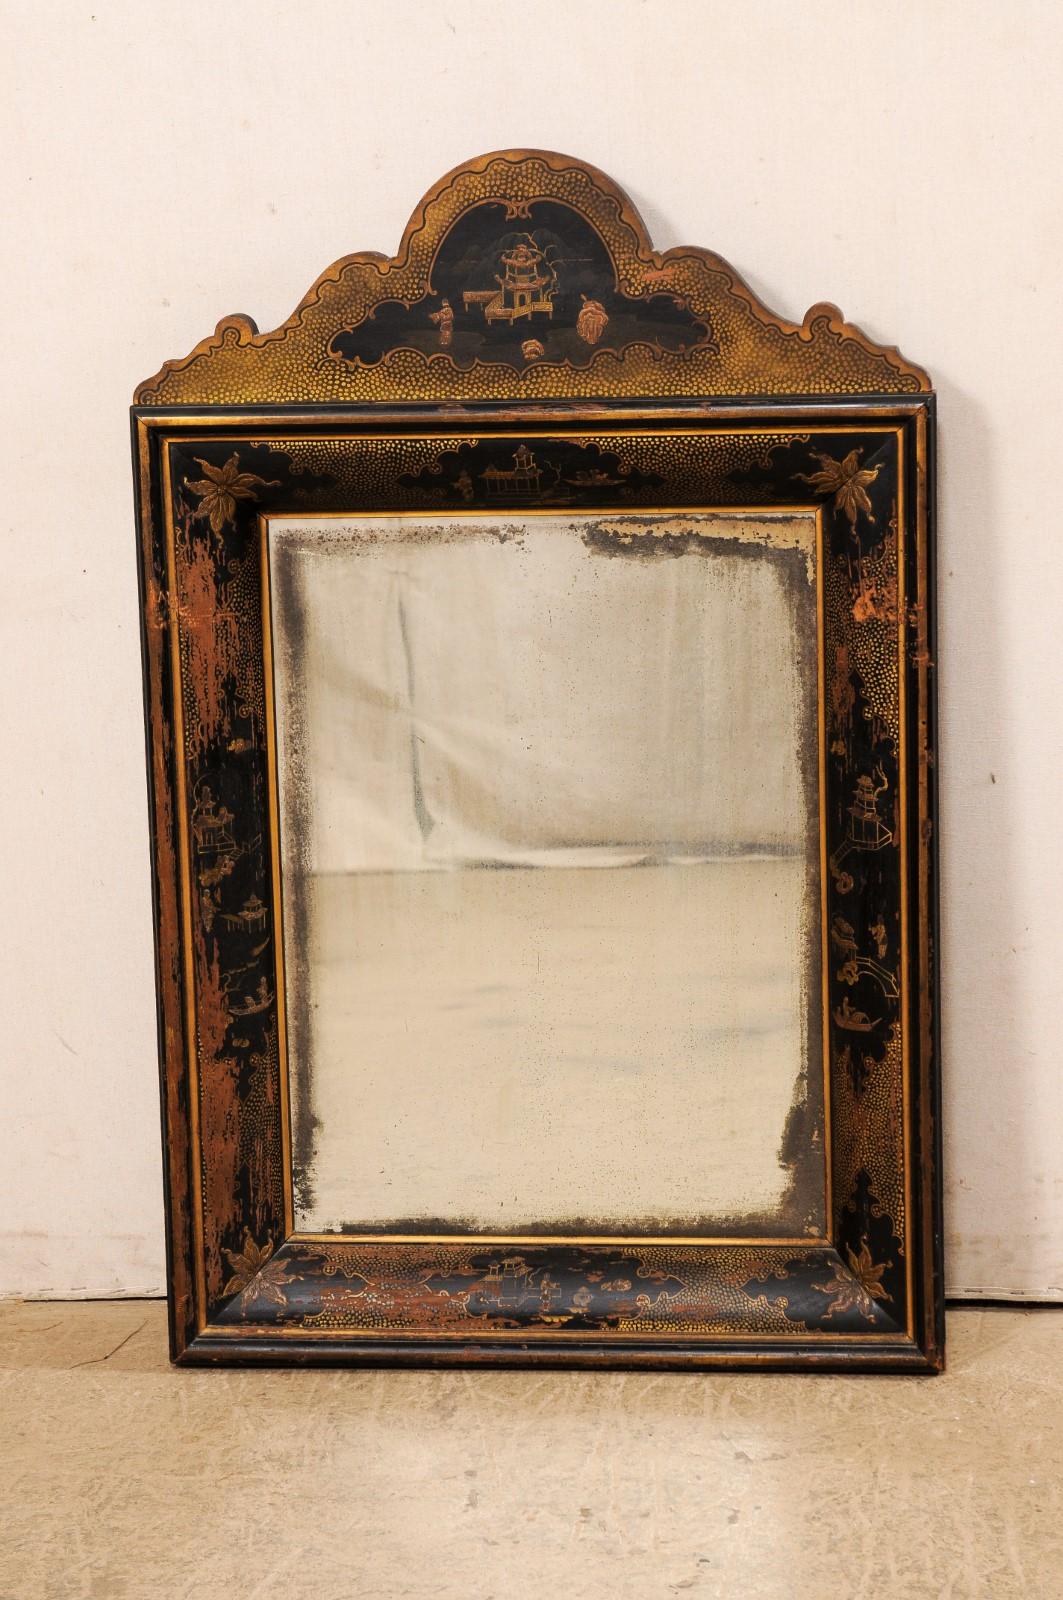 An English chinoiserie decorated wall mirror from the 19th century. This antique wall mirror from England has a nicely carved crest at top adorn in chinoiserie featuring an Asian landscape within its center. The rectangular frame which surrounds the